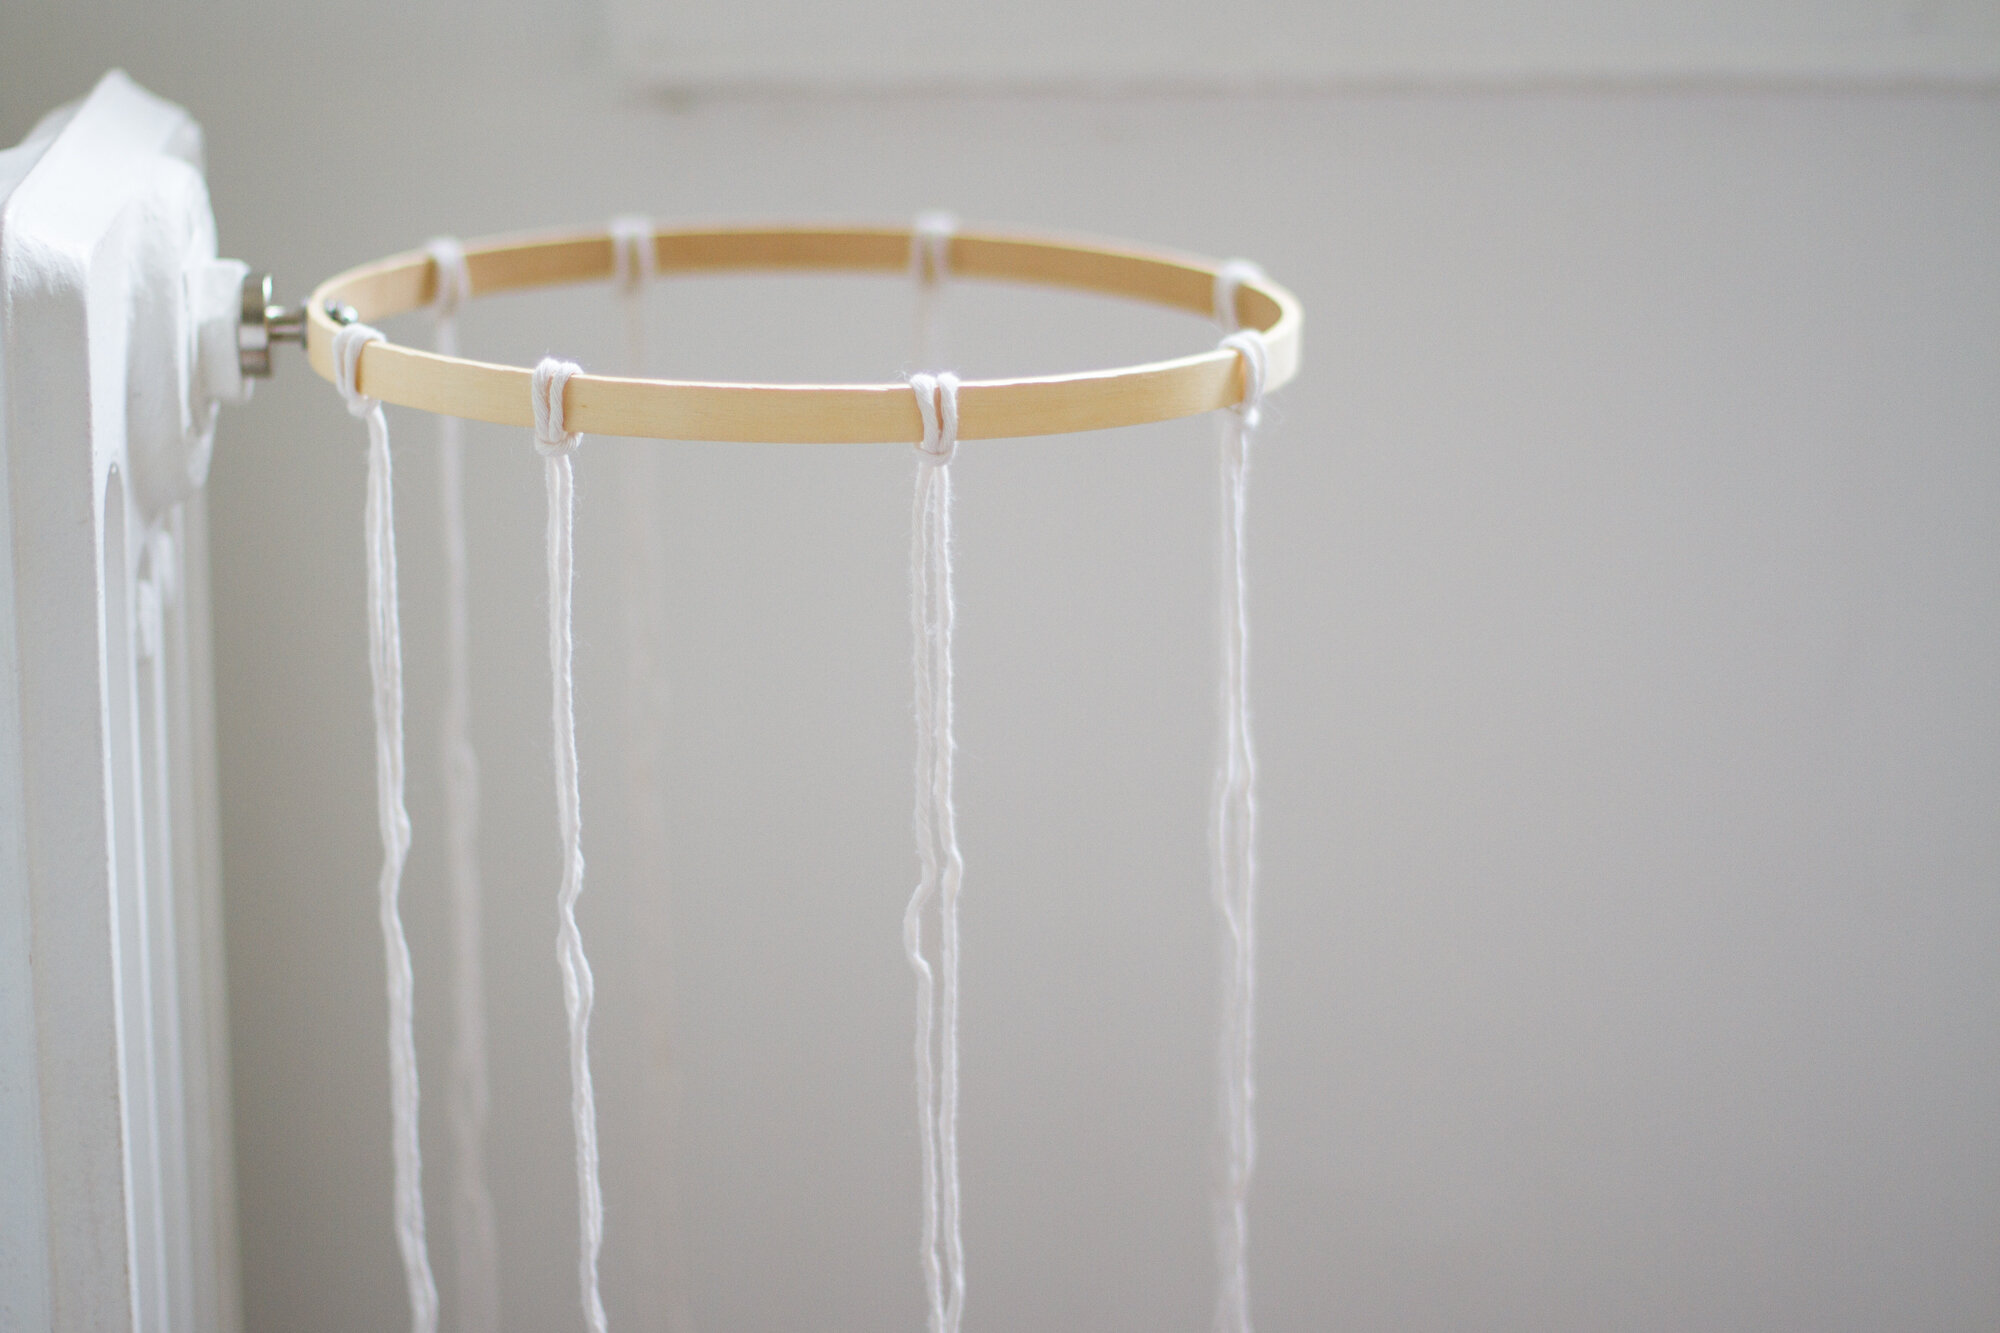 how to turn an embroidery hoop into a basketball hoop | reading my tea leaves